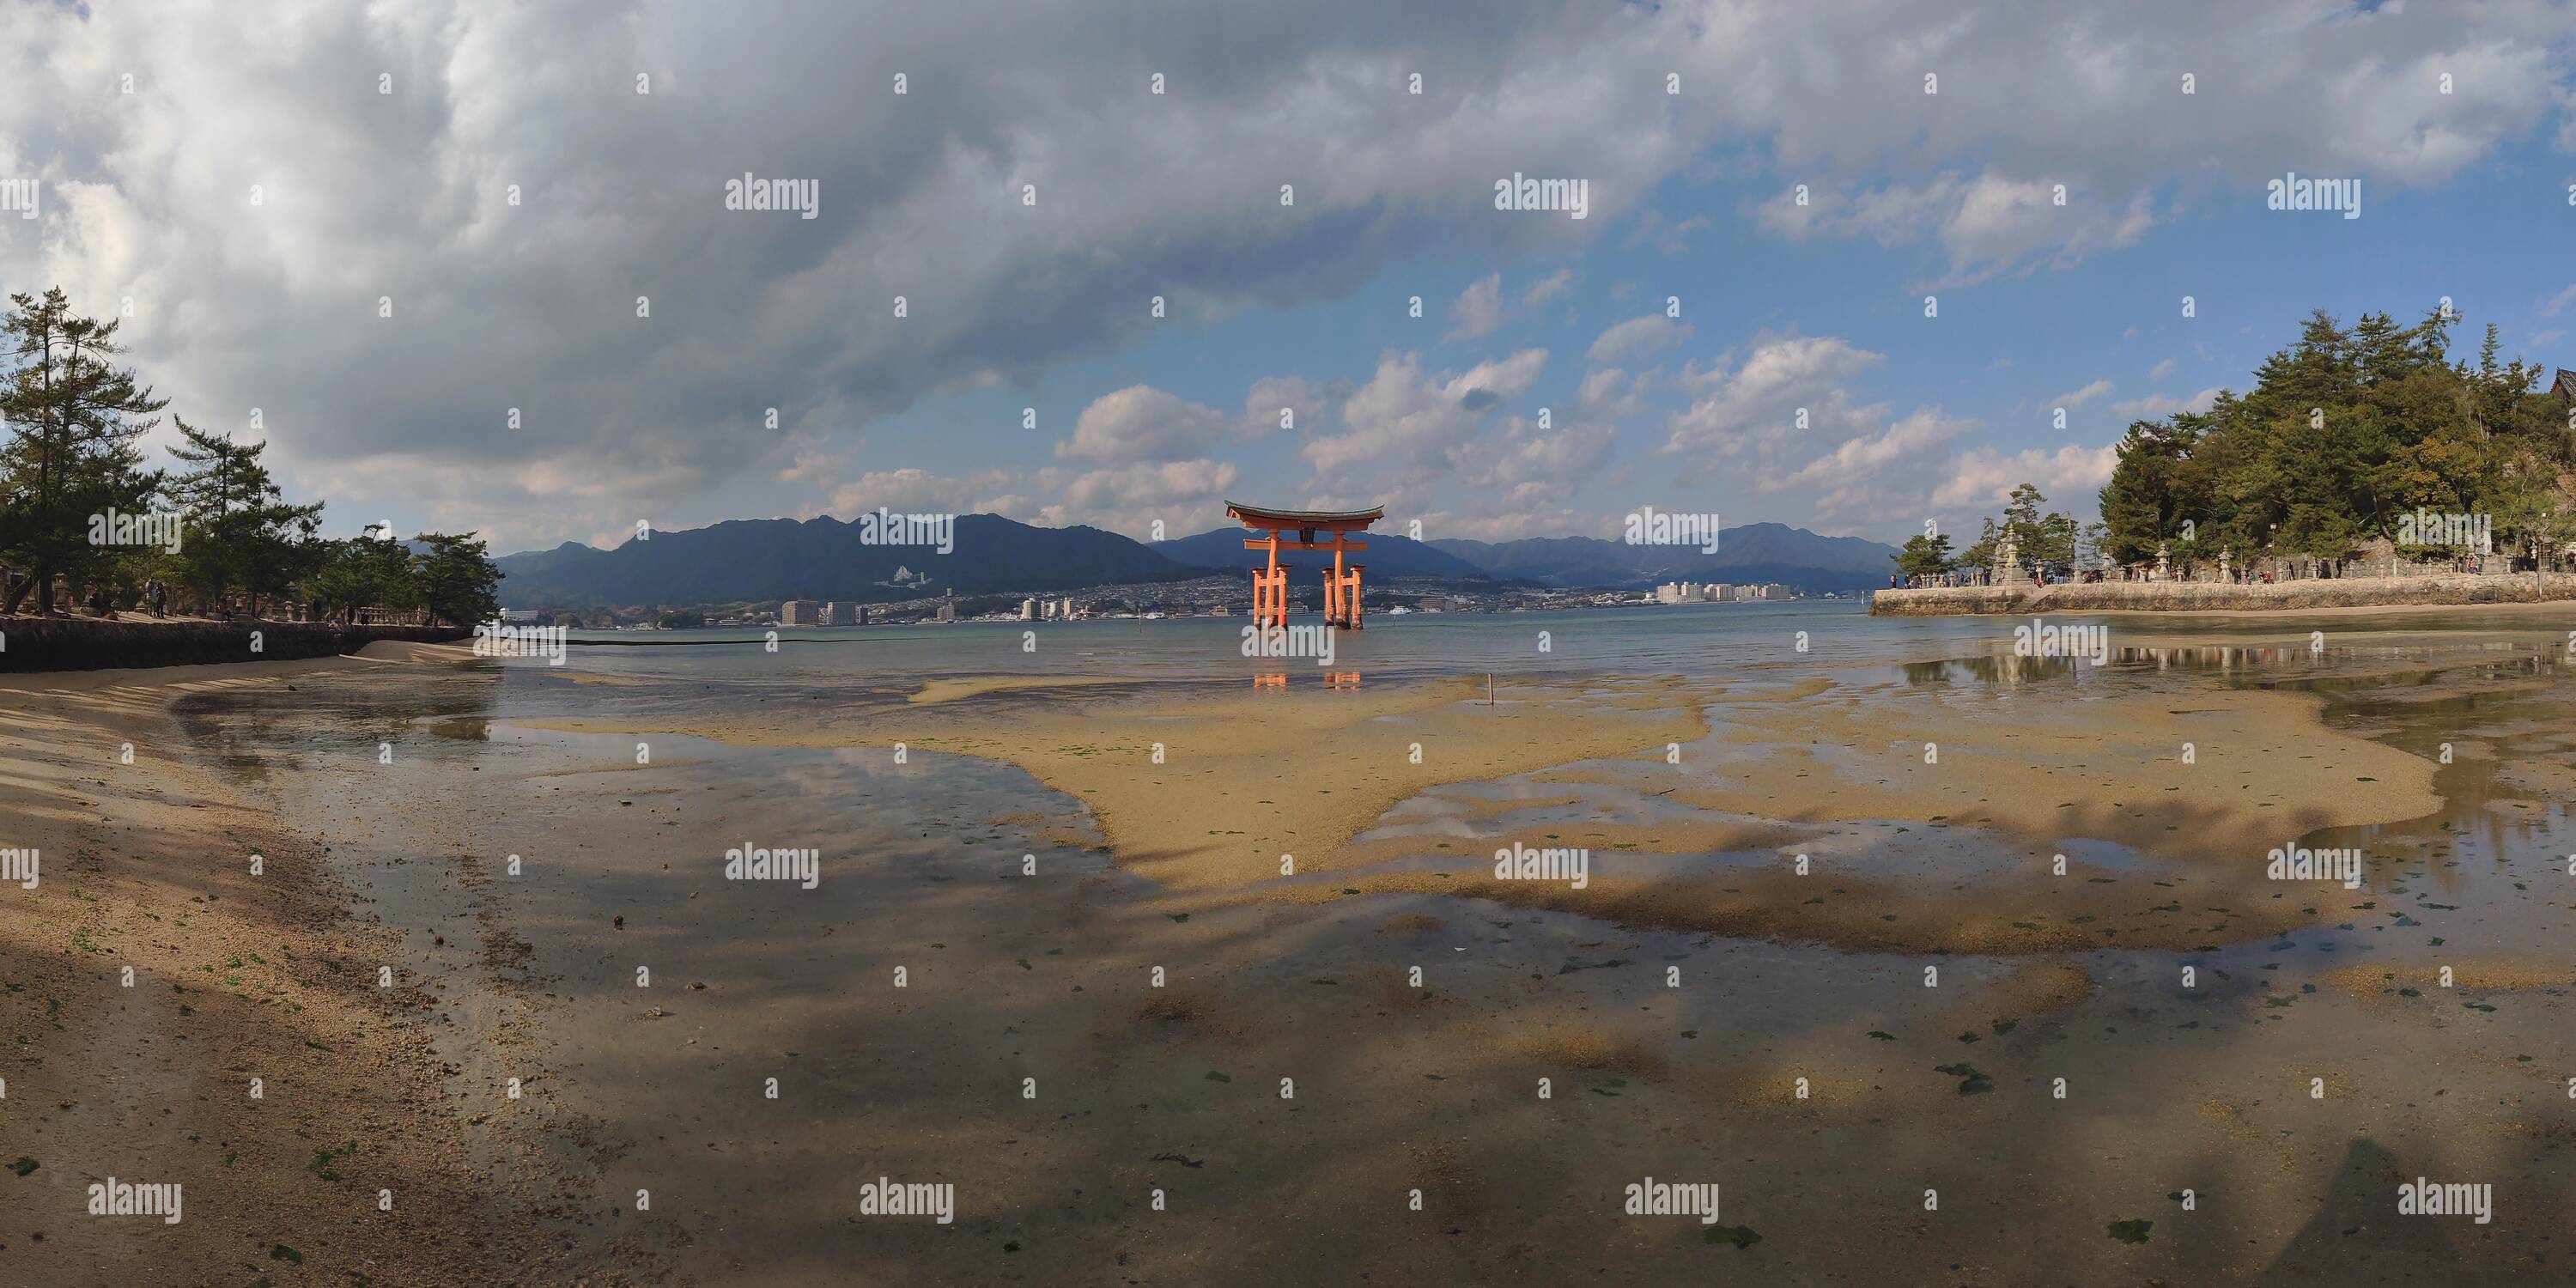 360 degree panoramic view of On miyajima island is one of the most important shrine of japan. The famous tori in the water in front of the island is a great spot for all visitors.